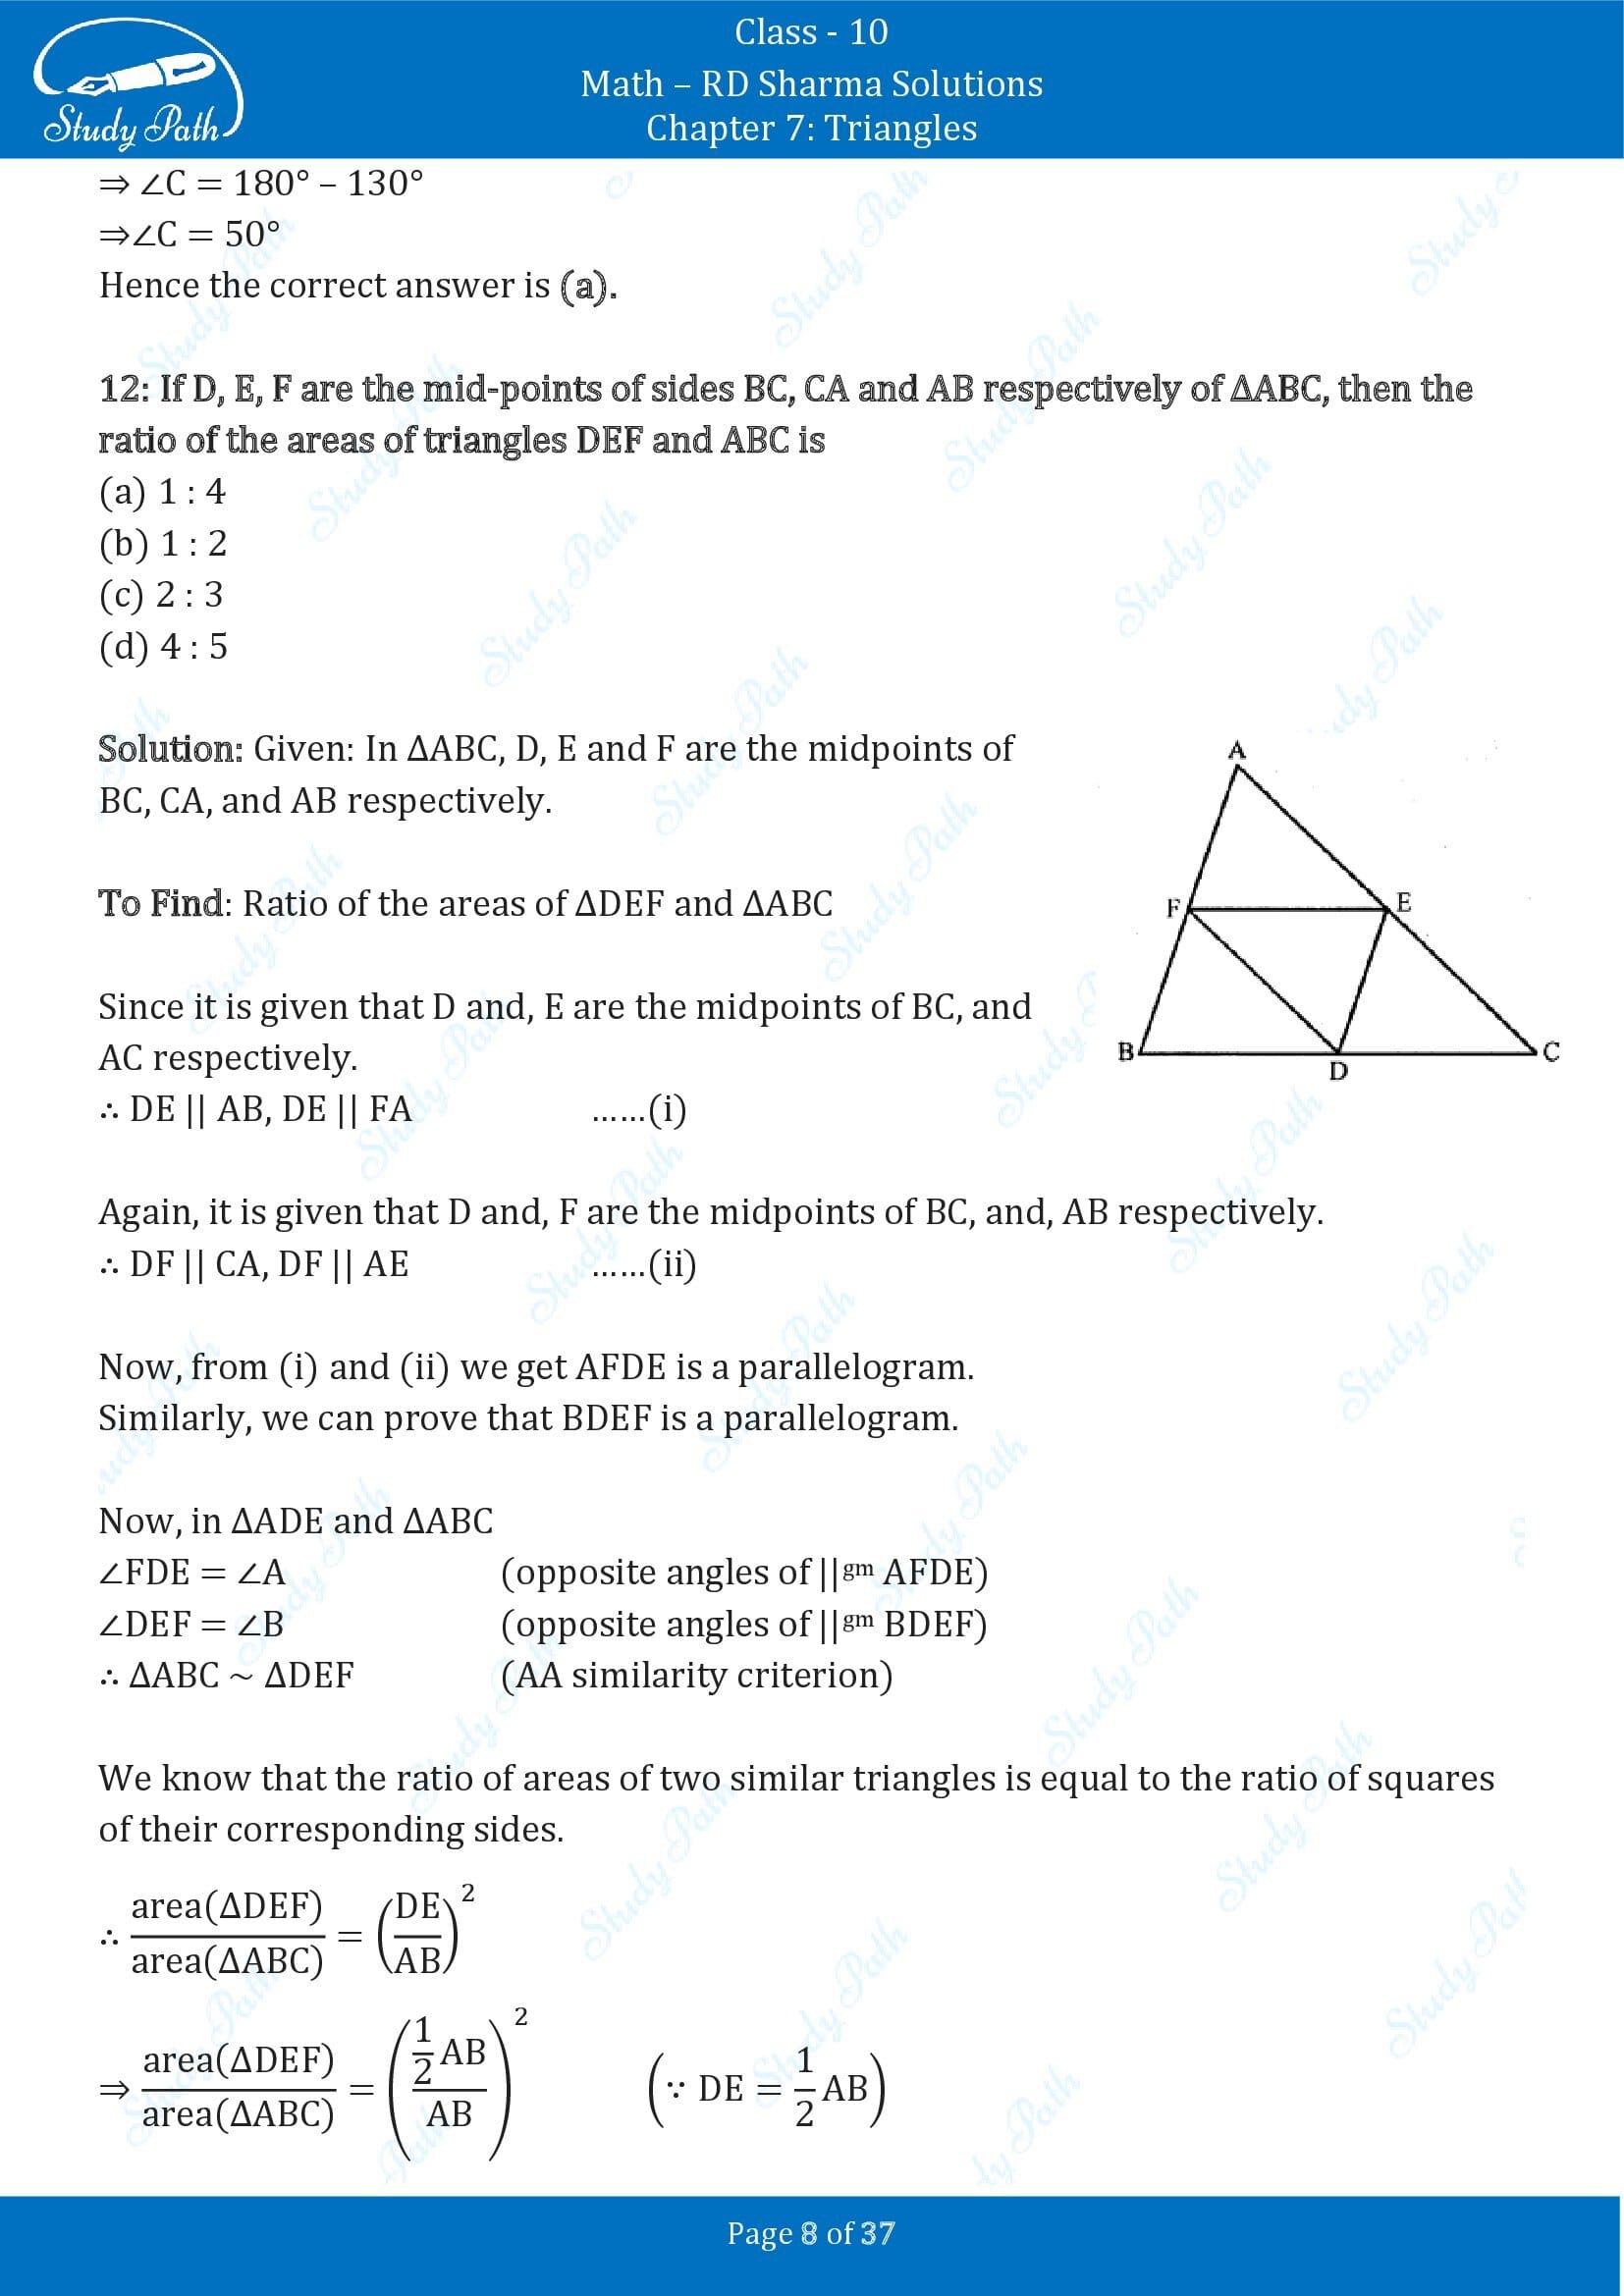 RD Sharma Solutions Class 10 Chapter 7 Triangles Multiple Choice Question MCQs 00008